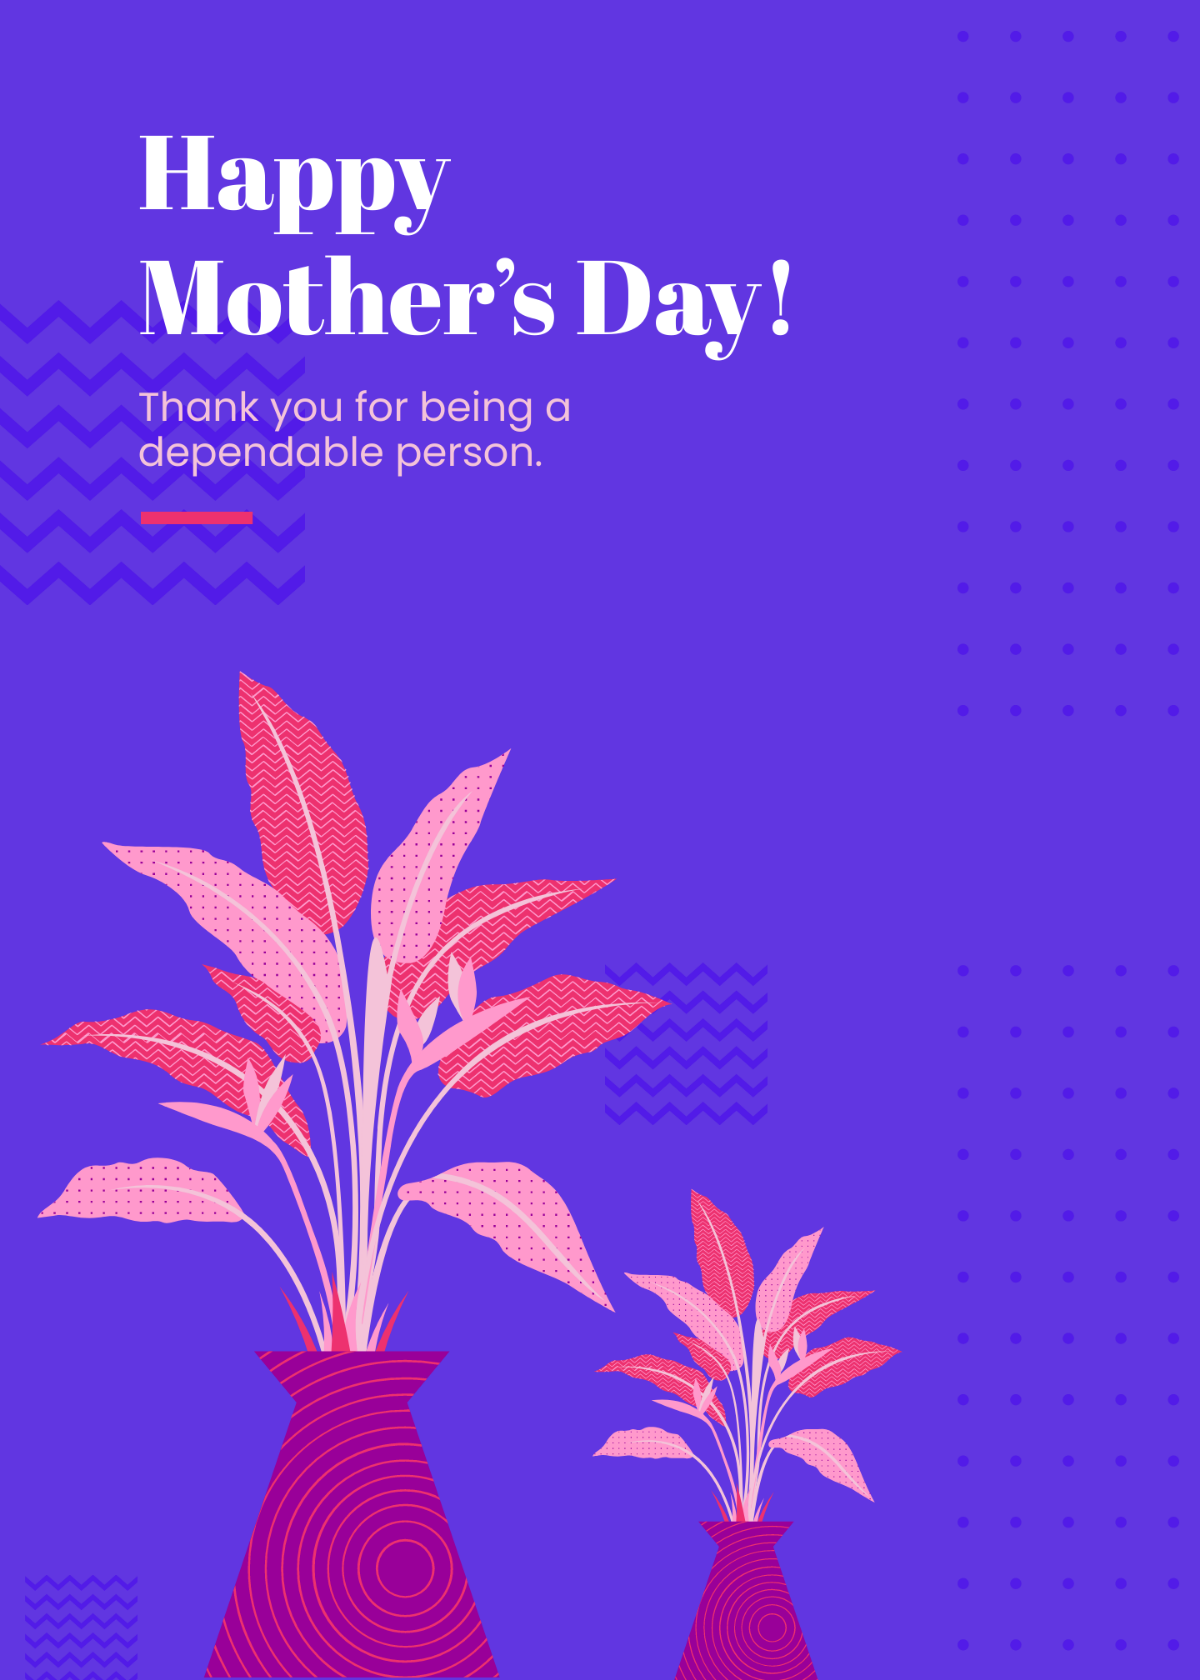 Mother's Day Greeting Template